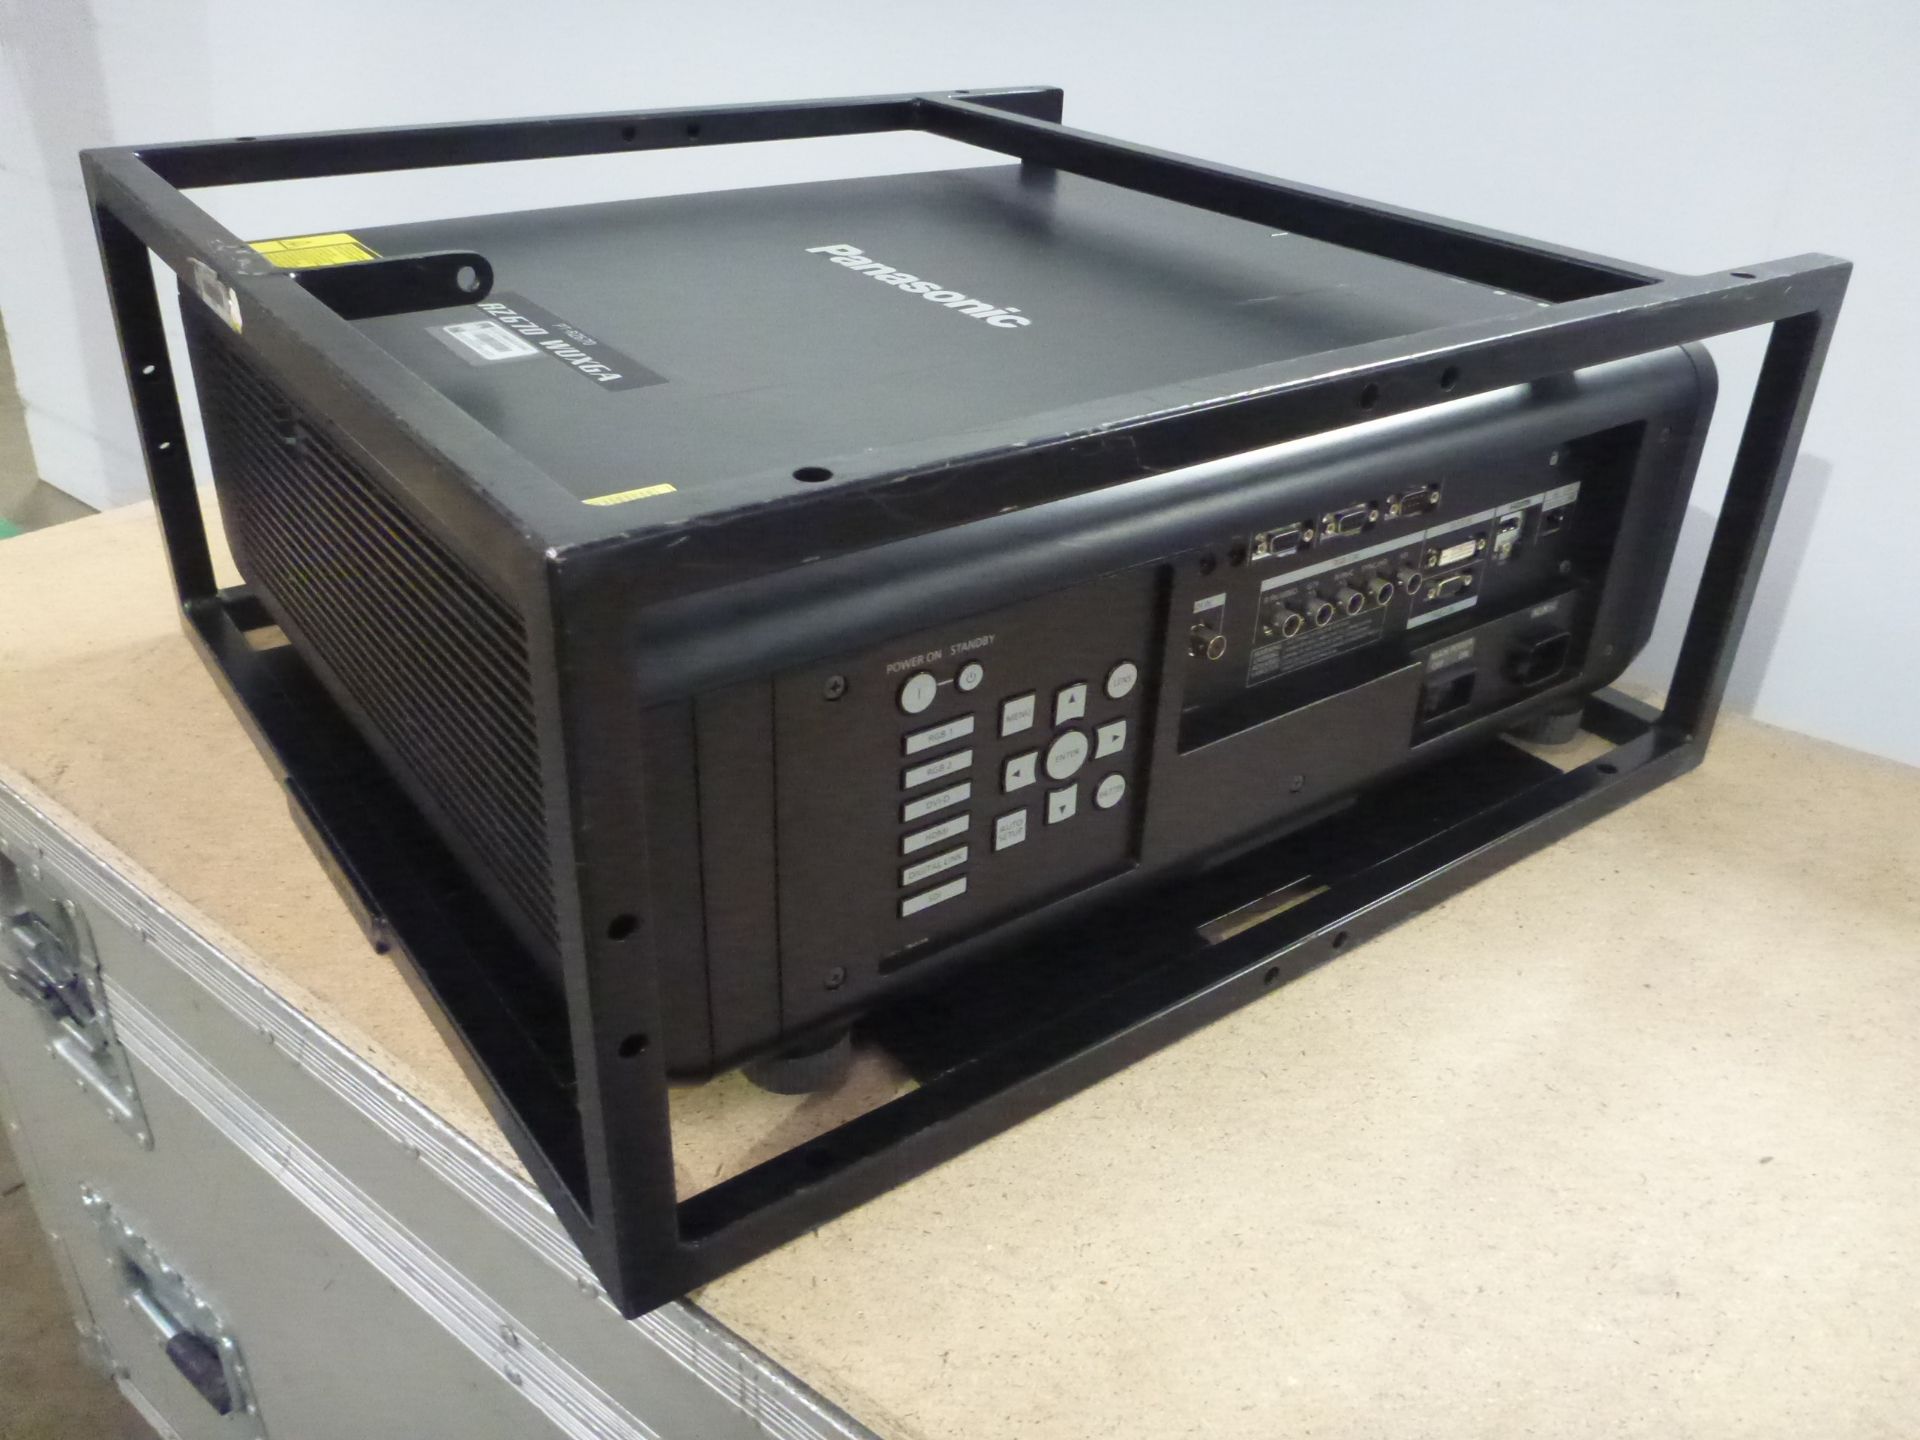 Panasonic Laser Projector, Model PT-RZ670, S/N SH5252006, YOM 2015, In flight case with standard 1. - Image 4 of 12